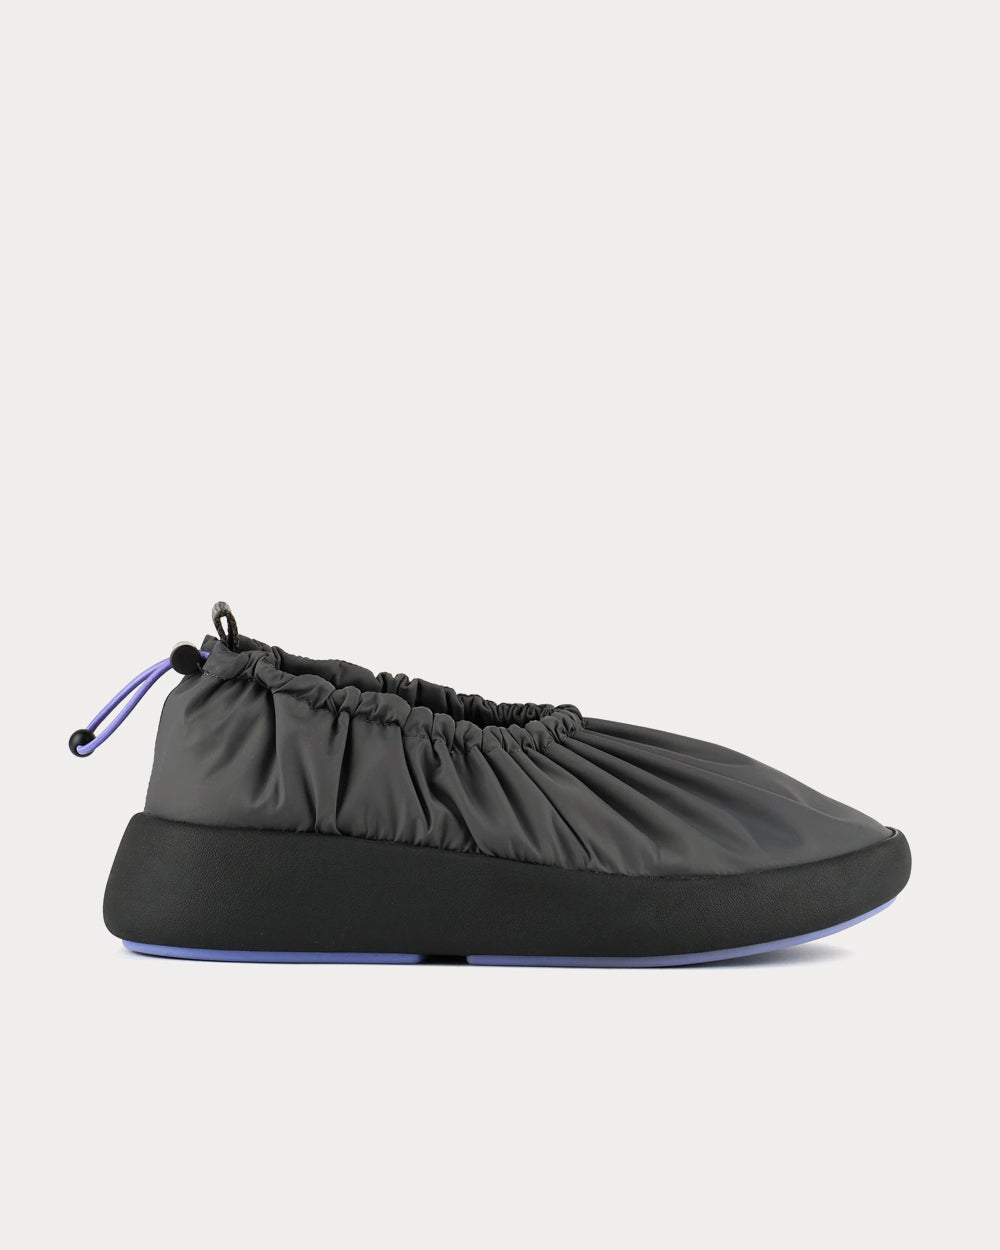 Issey Miyake - Cover Charcoal Slip On Sneakers